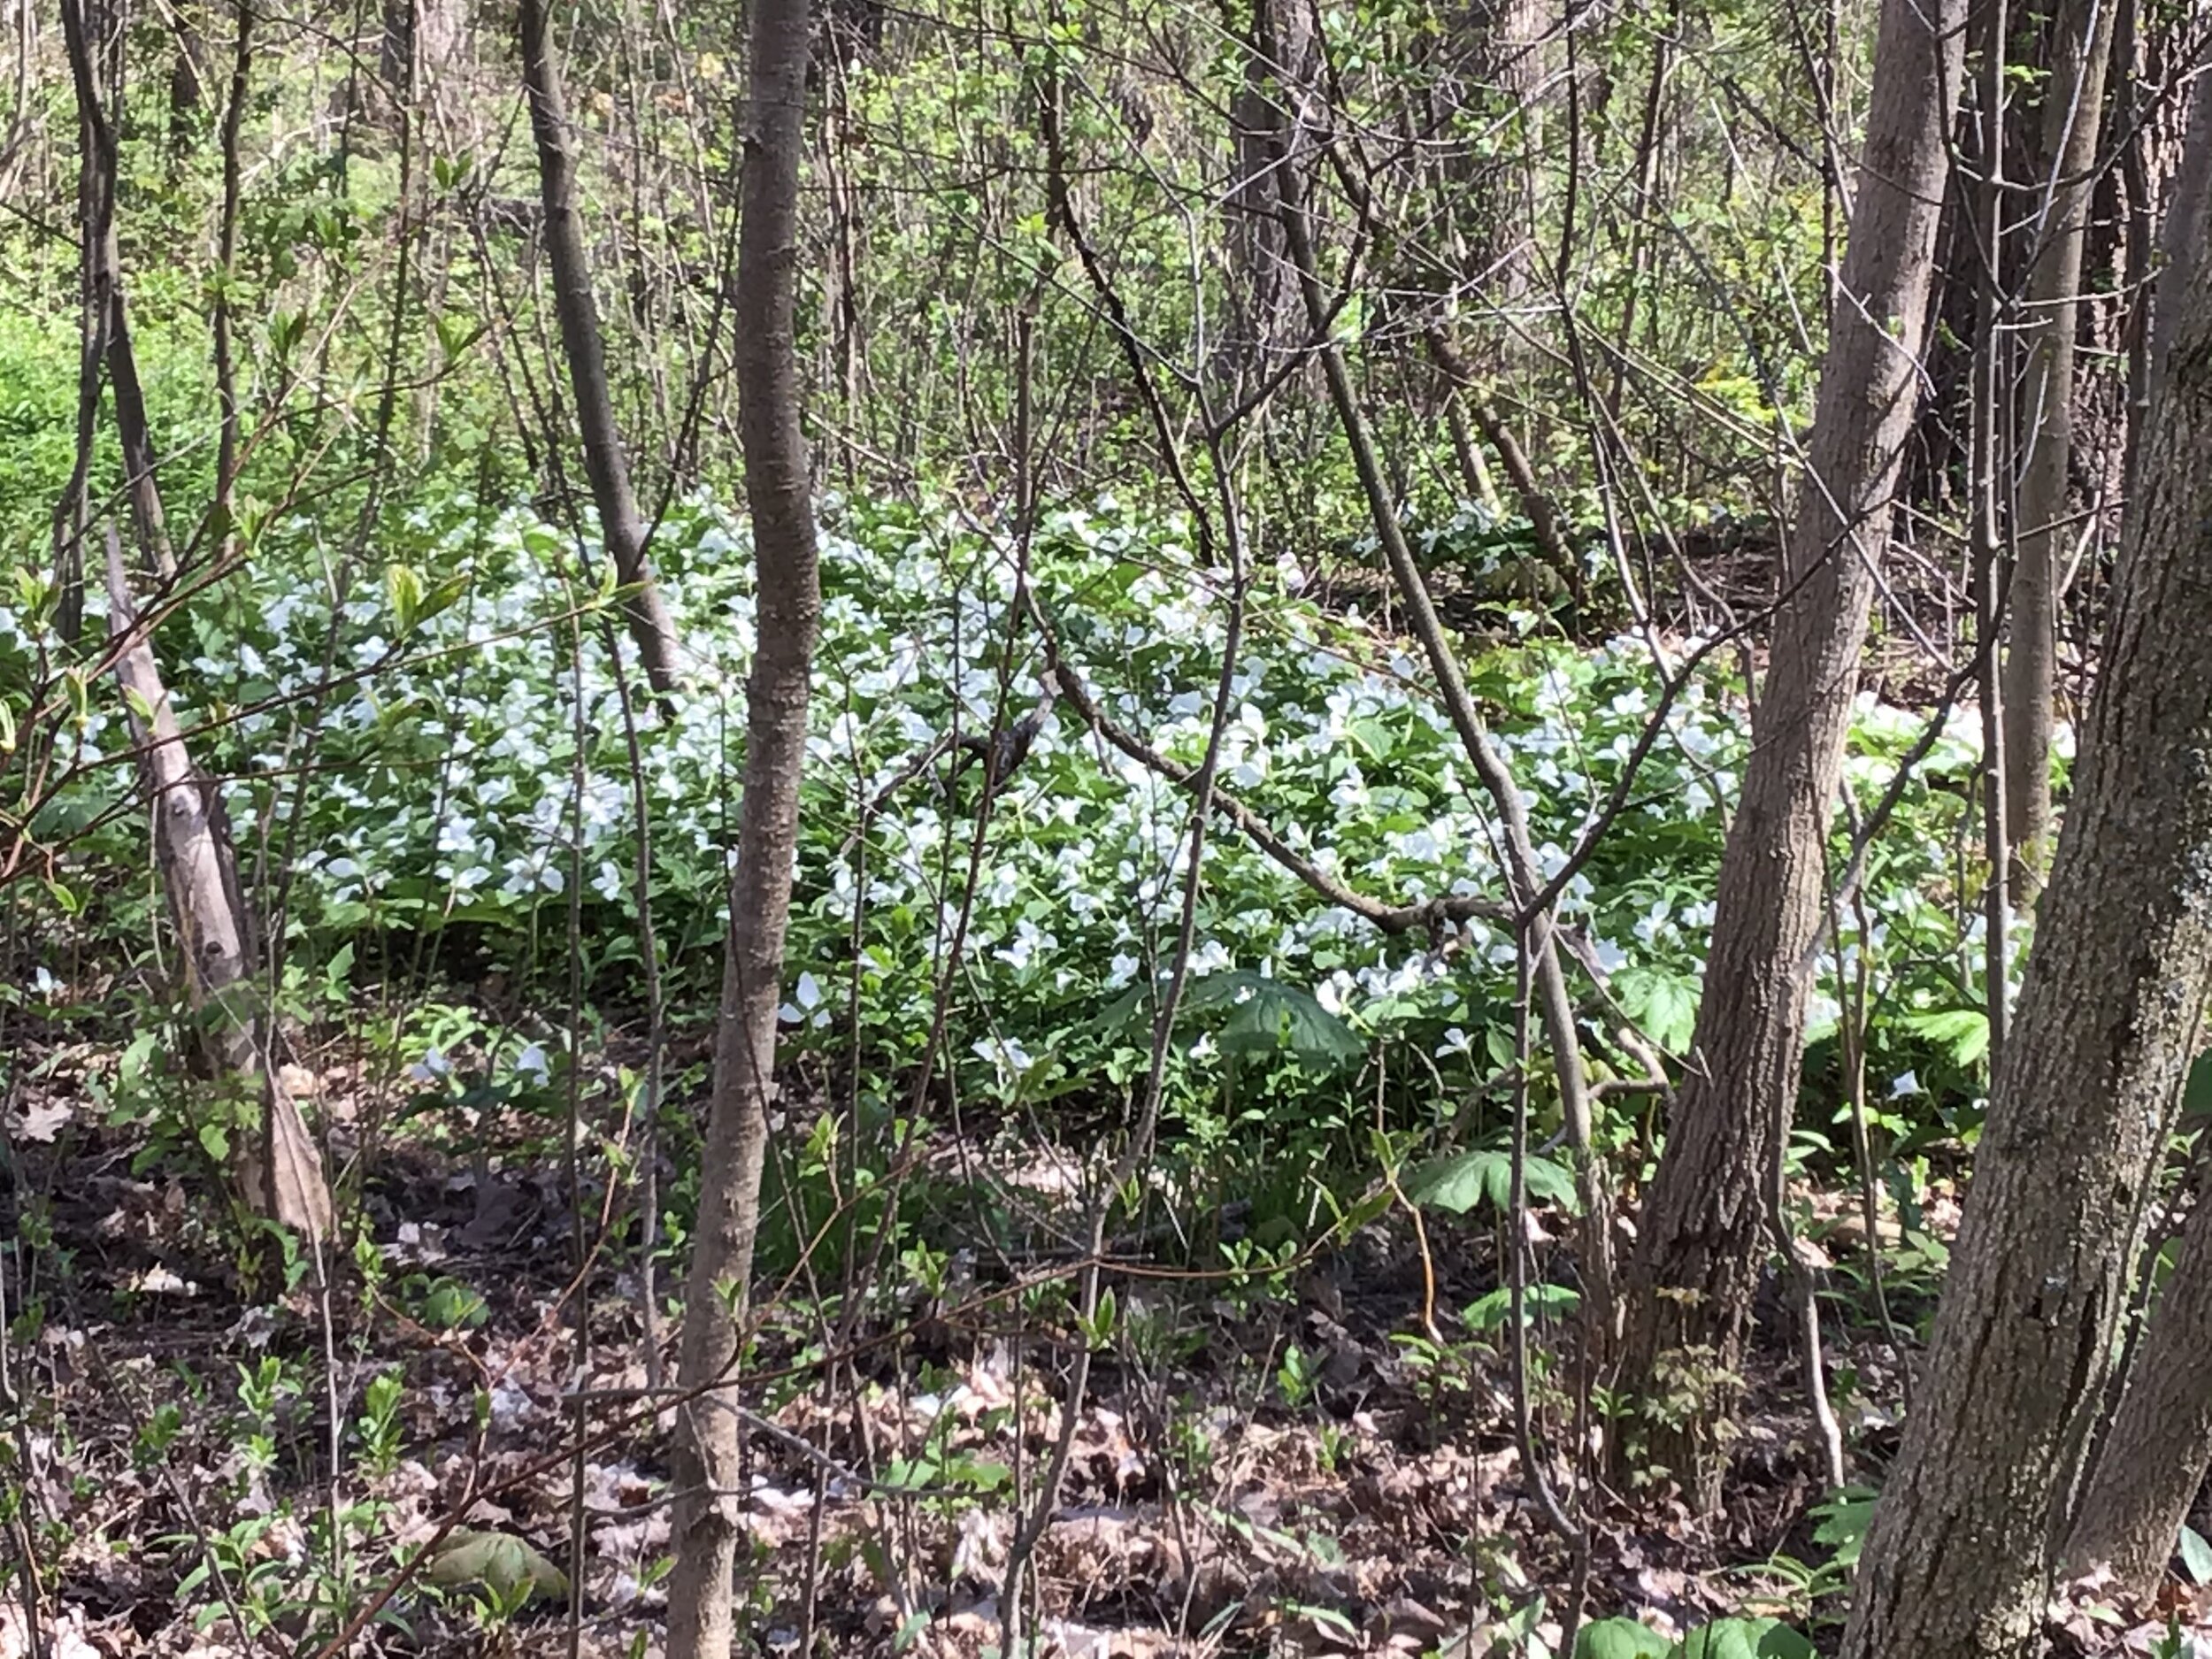 trilliums and may apples.jpg